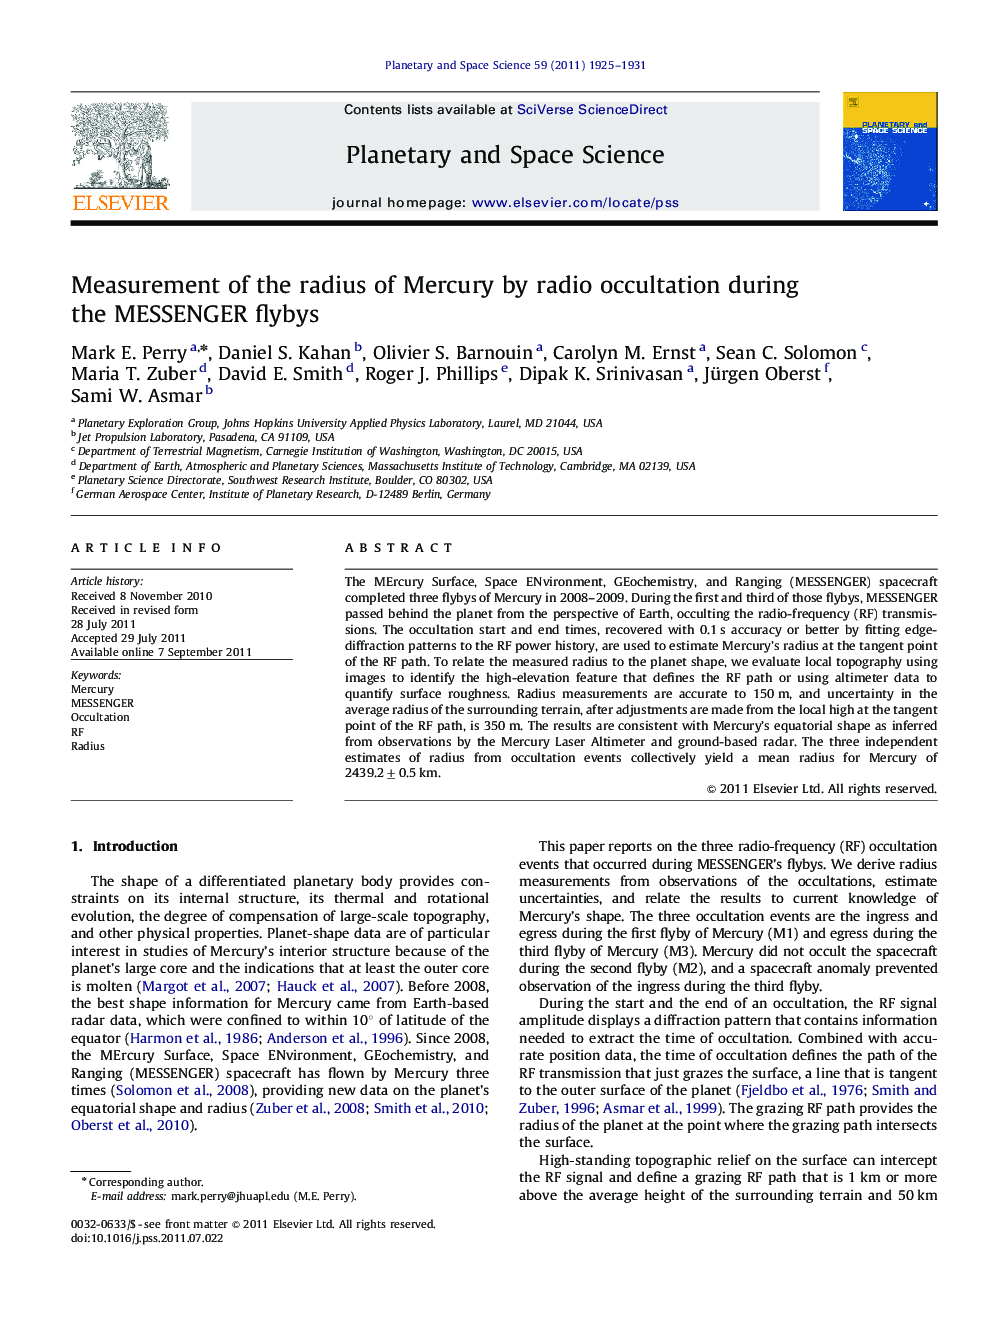 Measurement of the radius of Mercury by radio occultation during the MESSENGER flybys